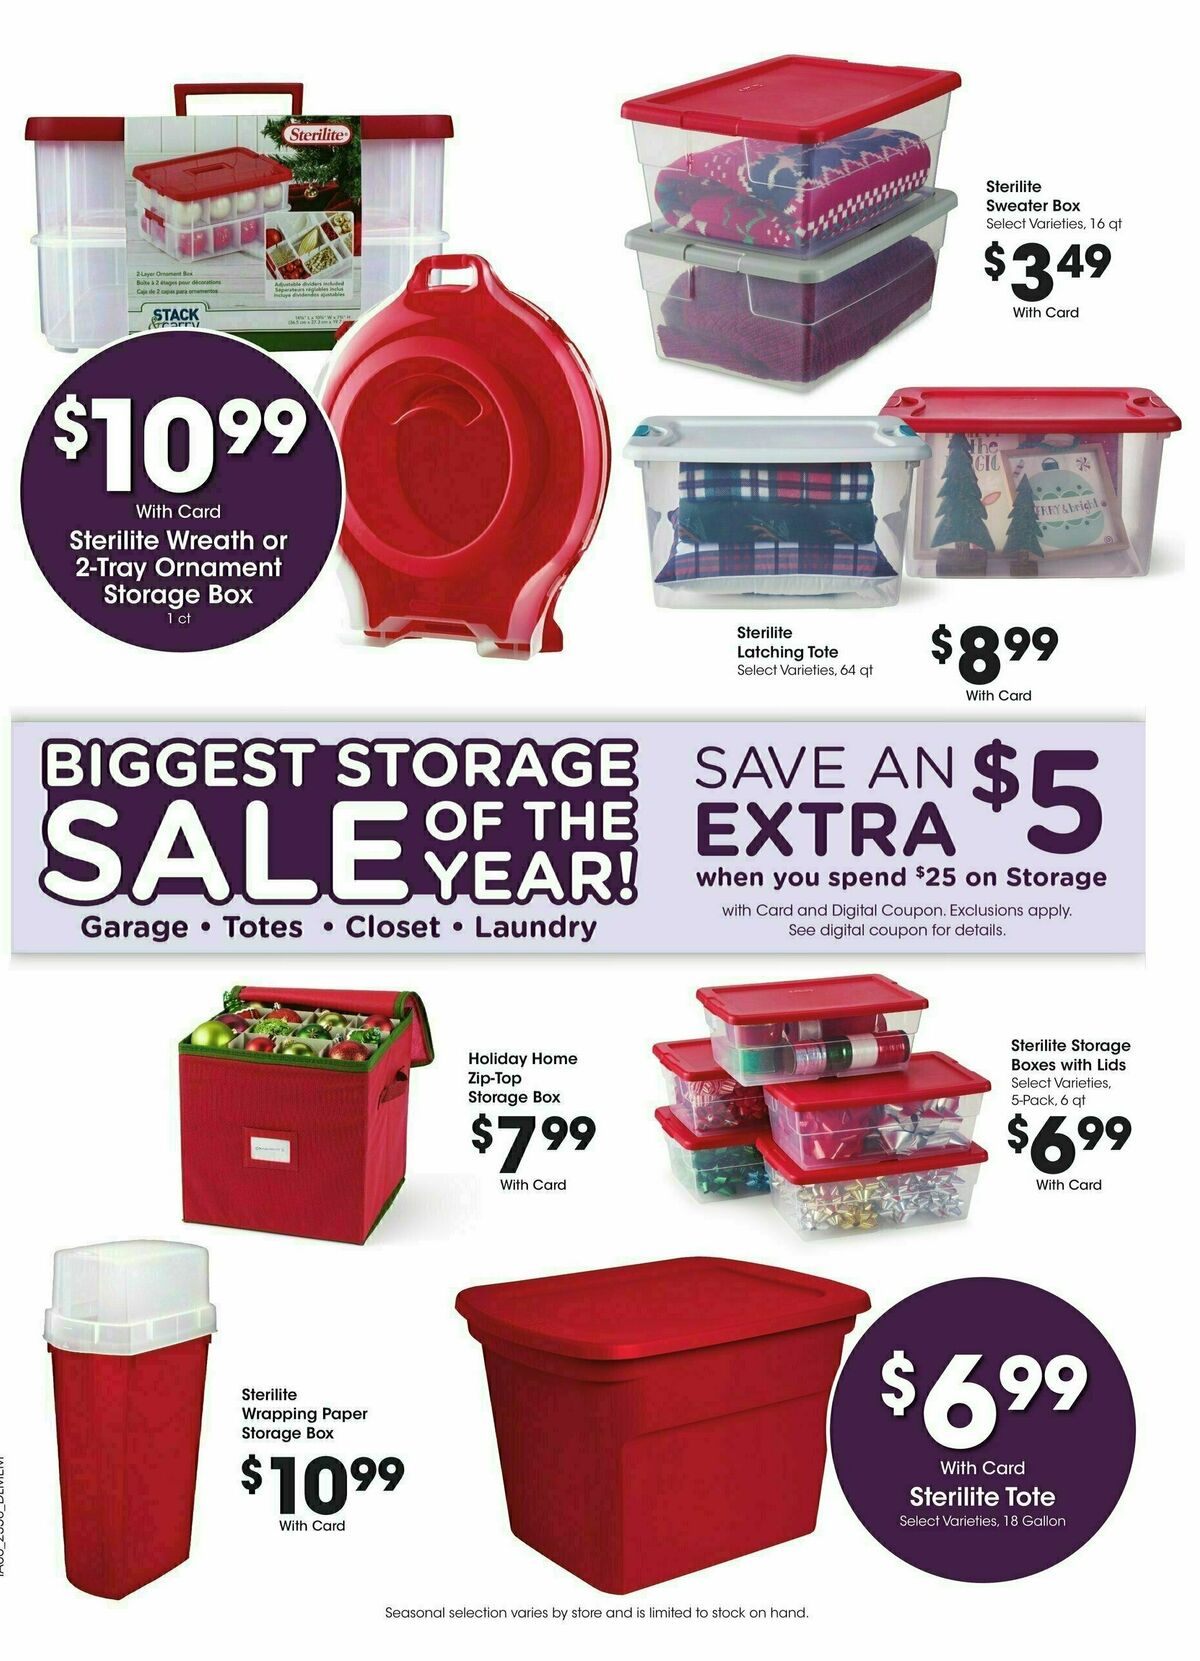 Kroger Weekly Ad from January 10